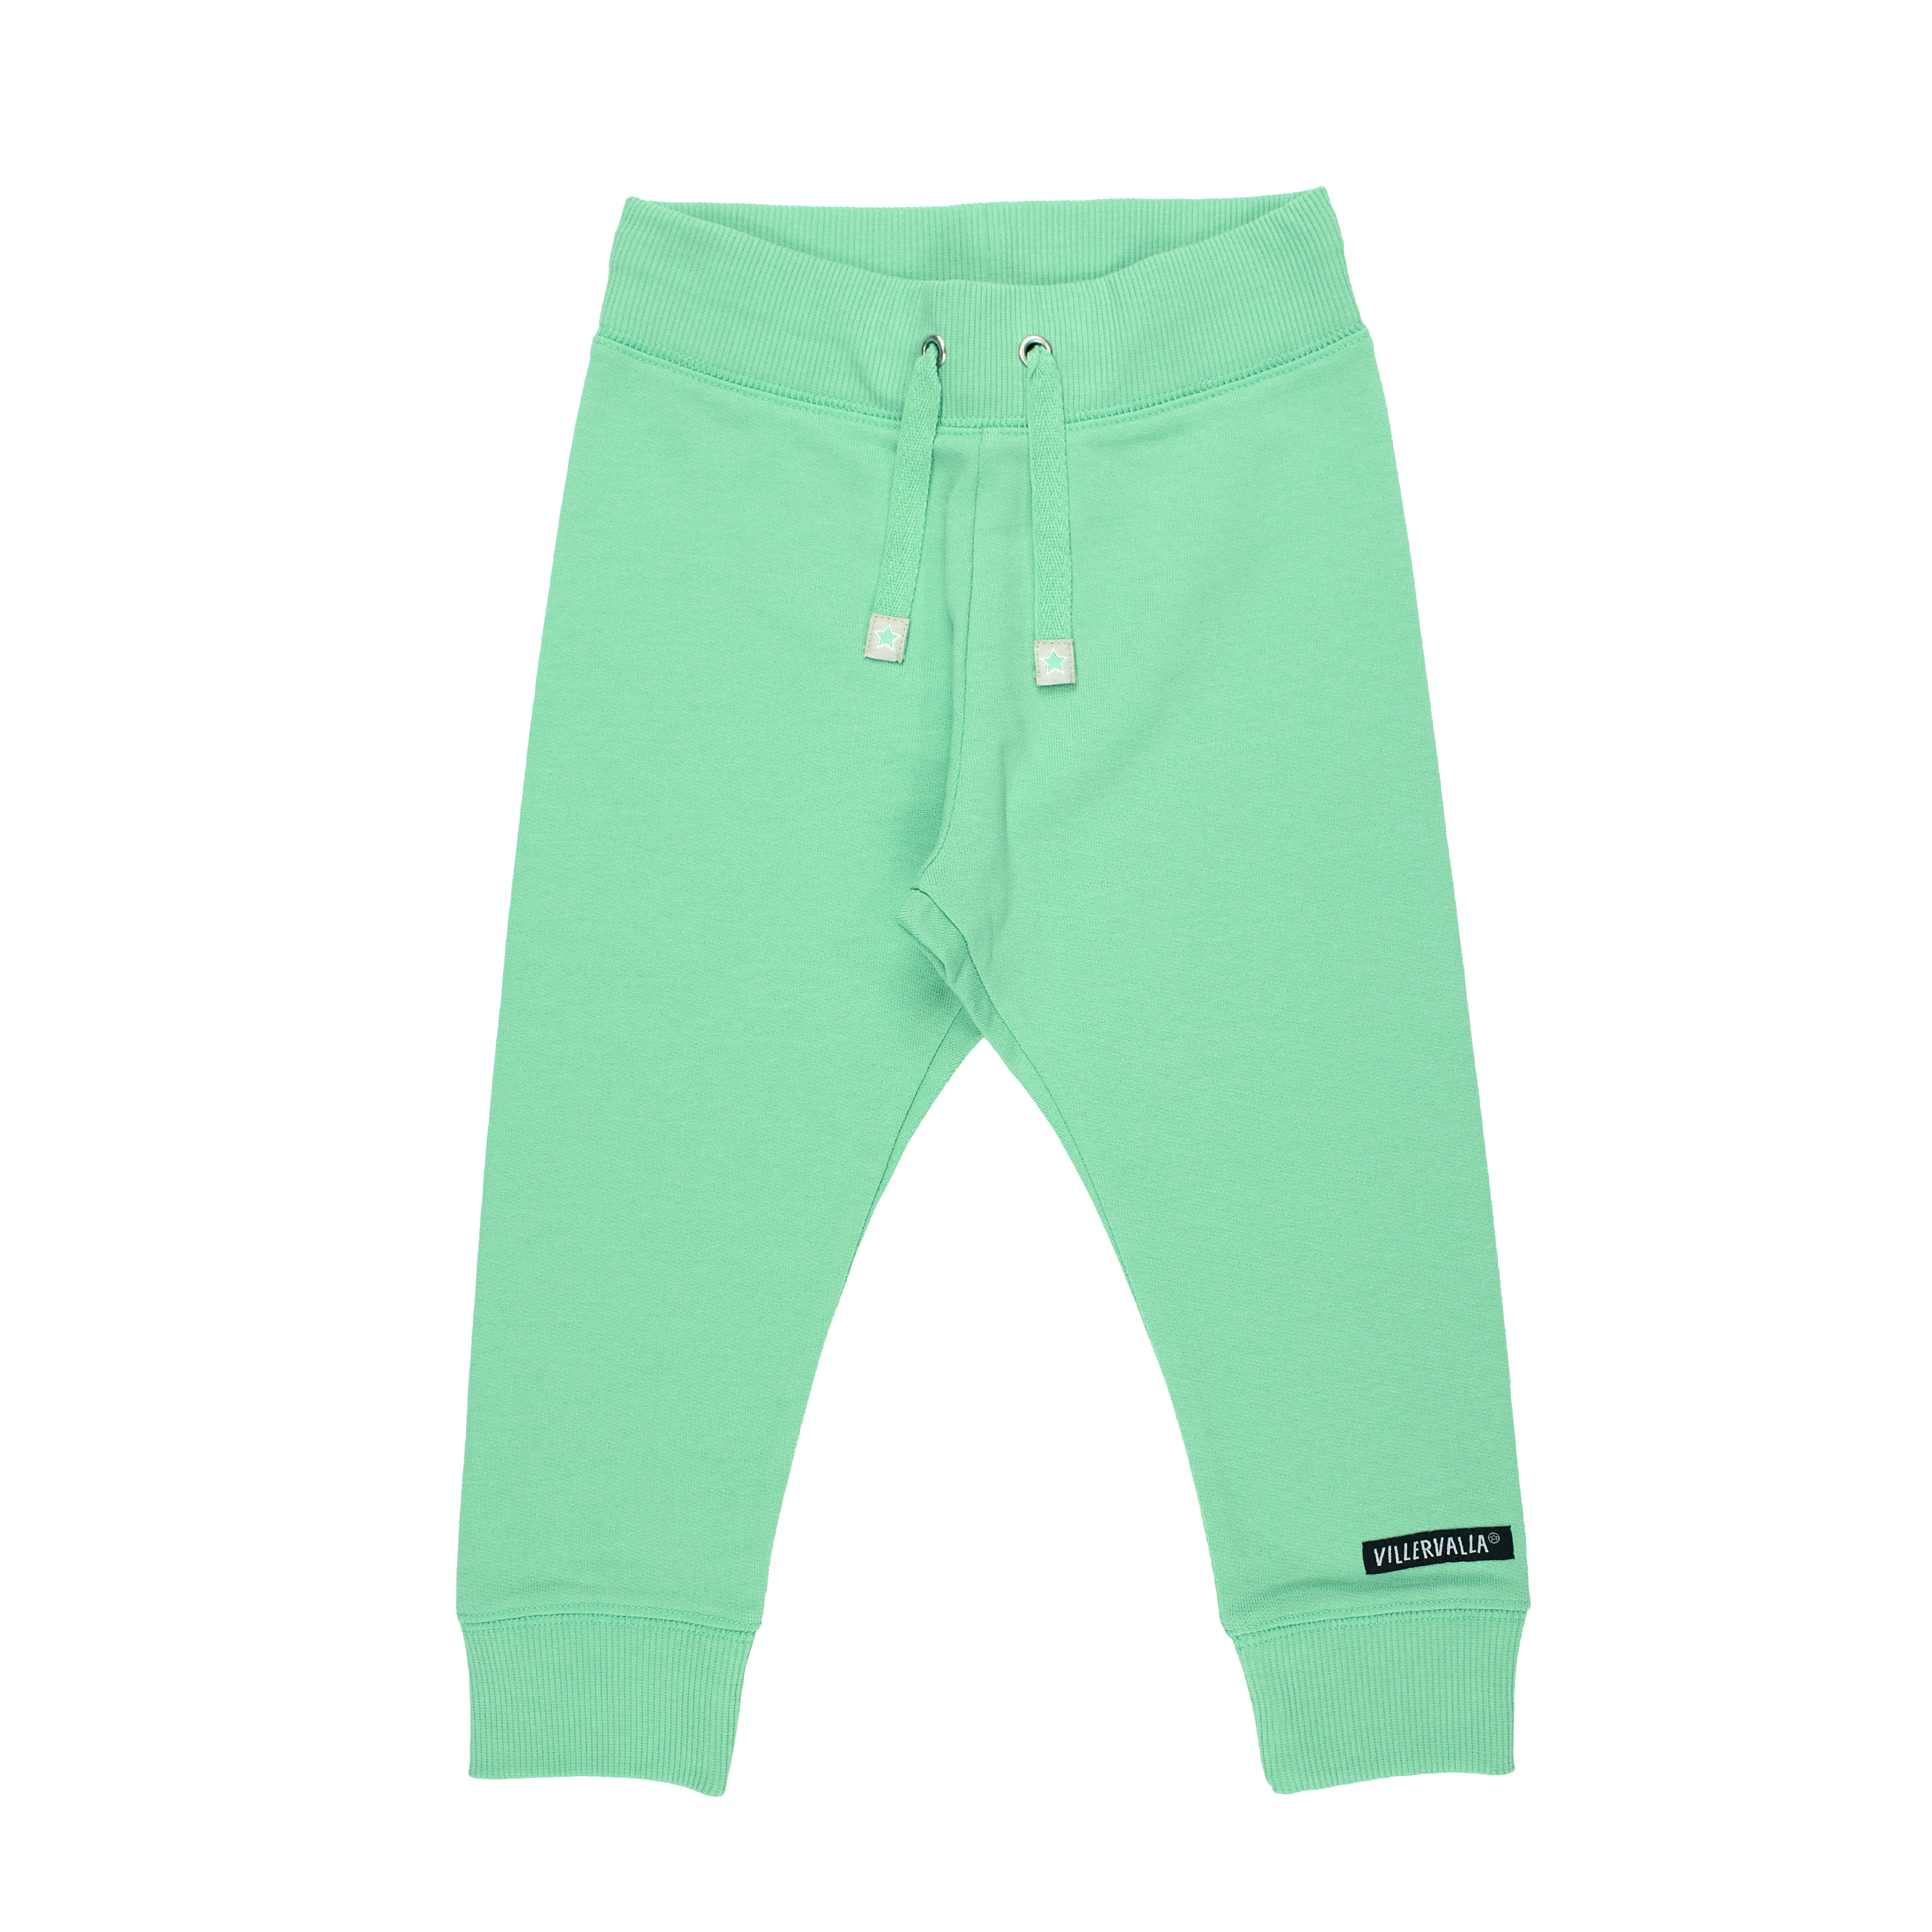 Villervalla - Relaxed Joggers - Pear